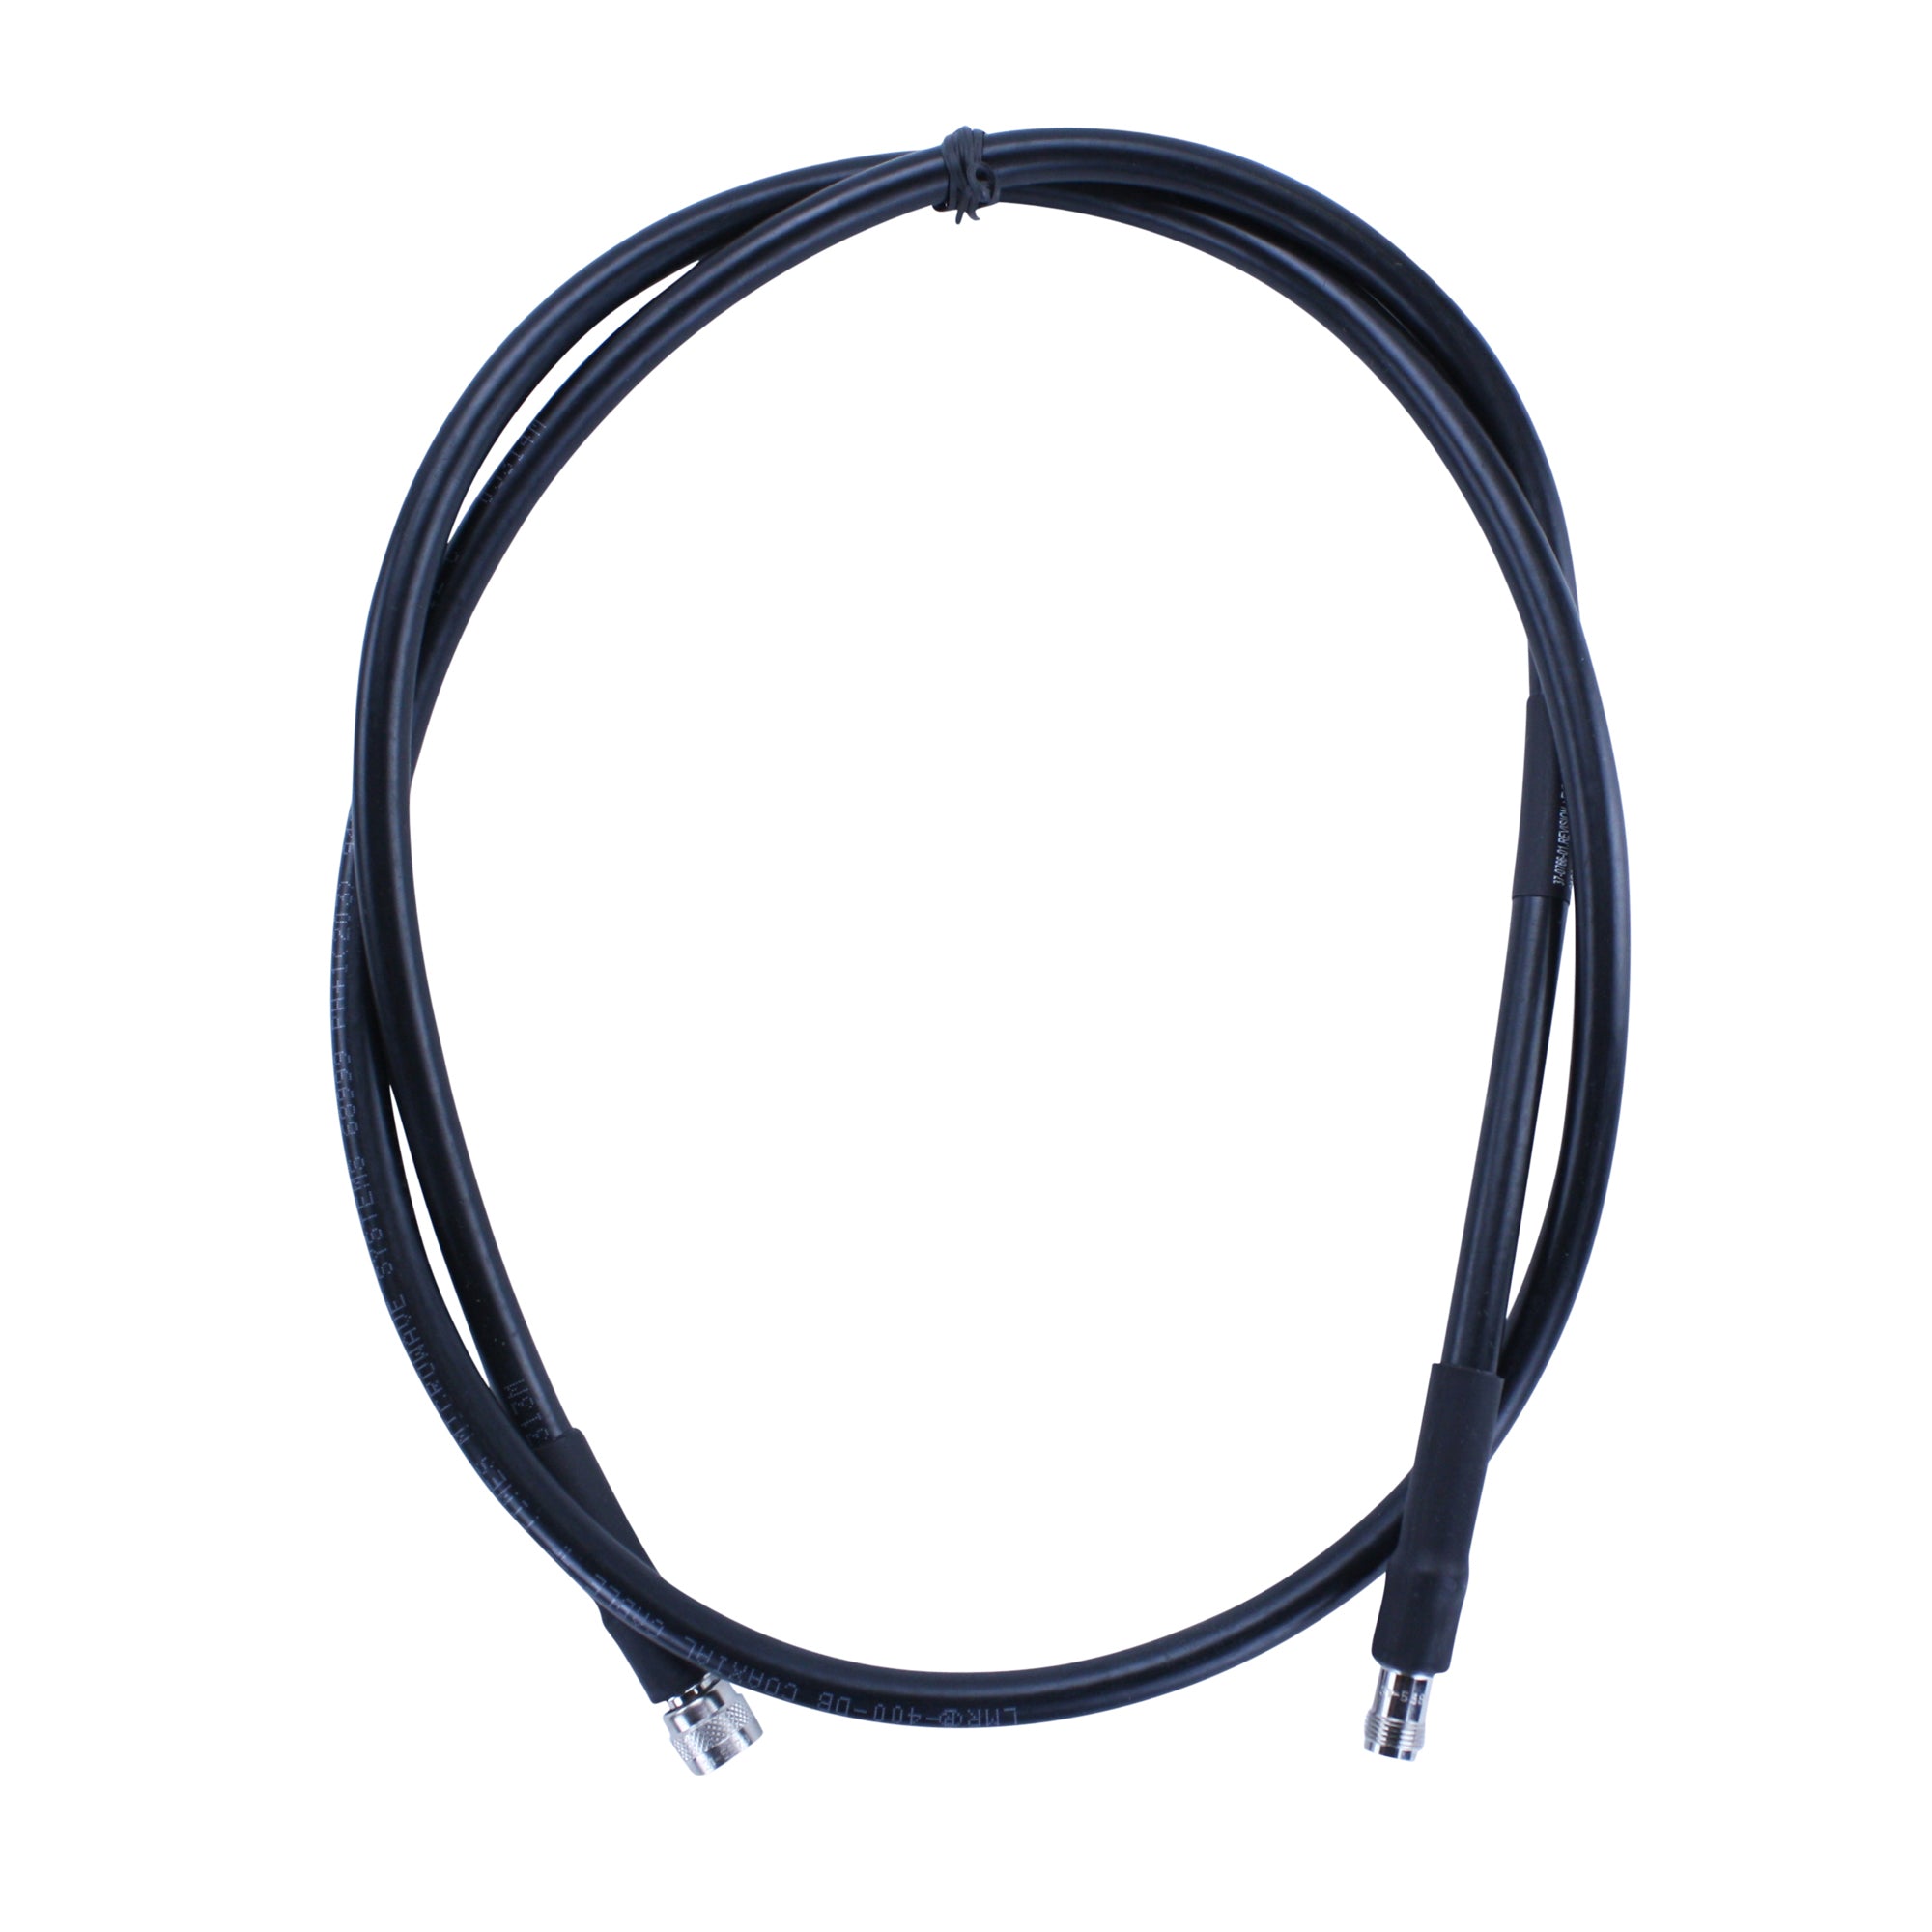 Cisco Networks, CISCO AIR-CAB005LL-R 5' AIRONET LOW LOSS RF CABLE WITH RP-TNC CONNECTORS